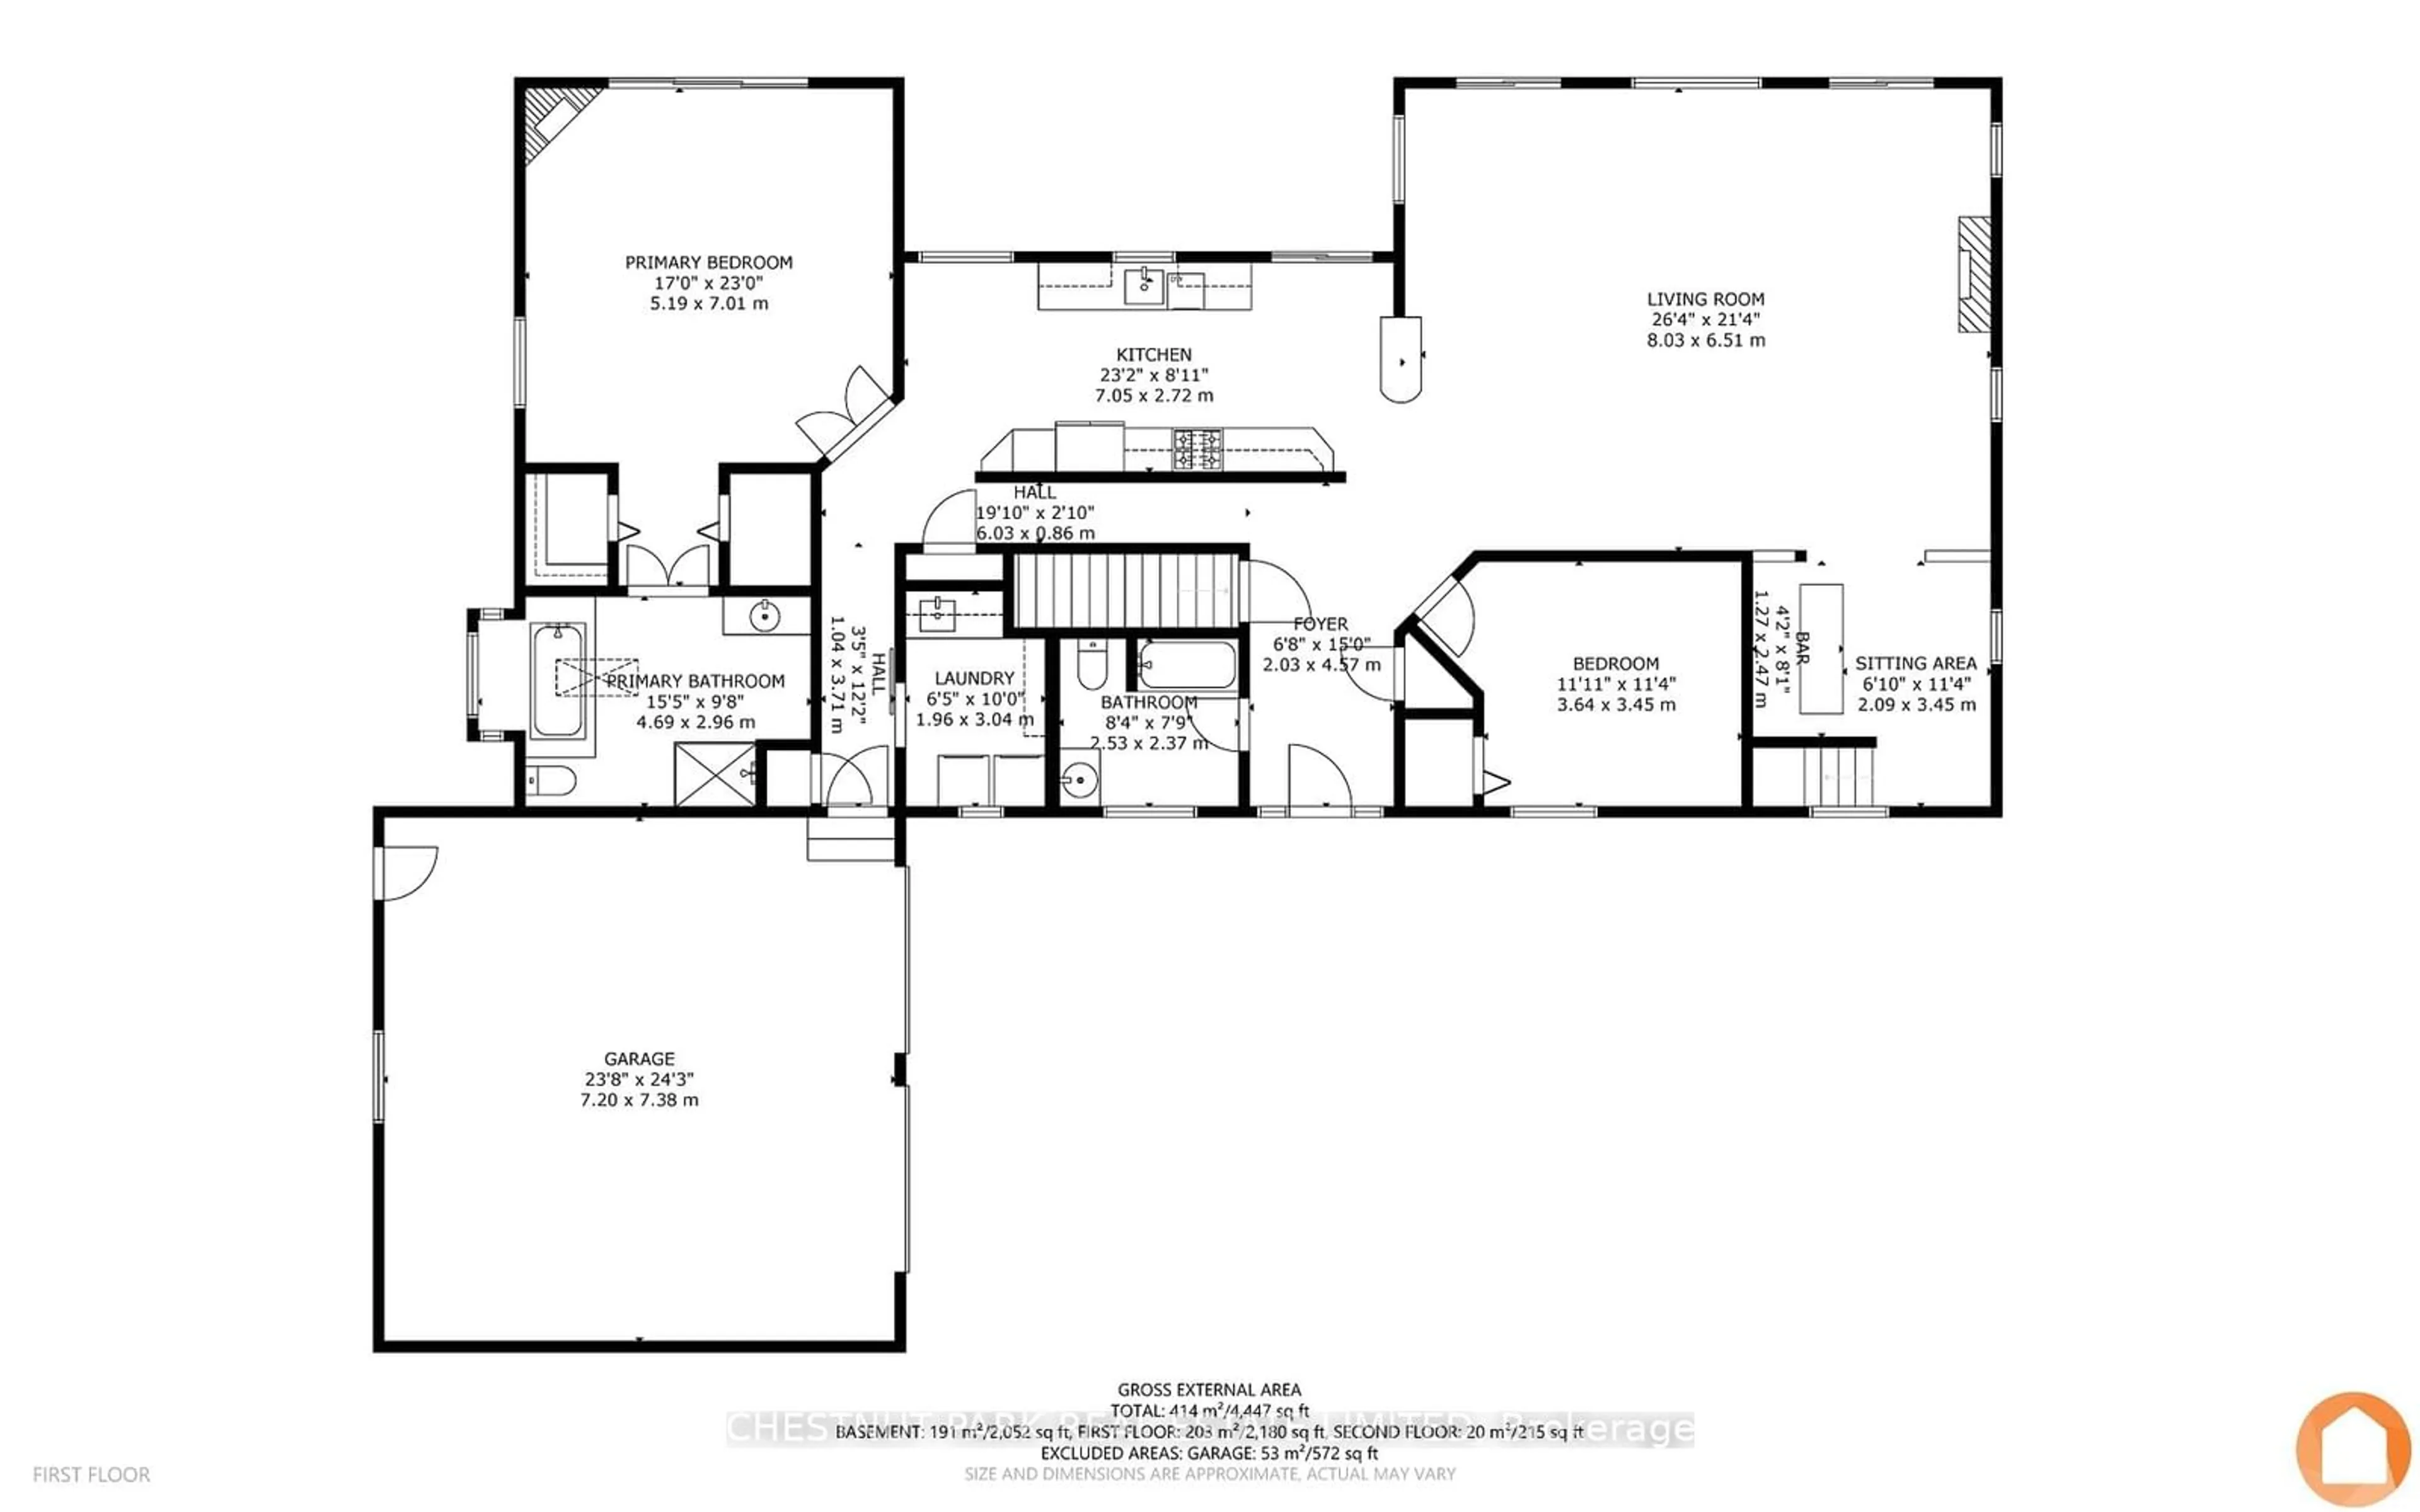 Floor plan for 43 Smiths Bay Ave, Prince Edward County Ontario K0K 2T0